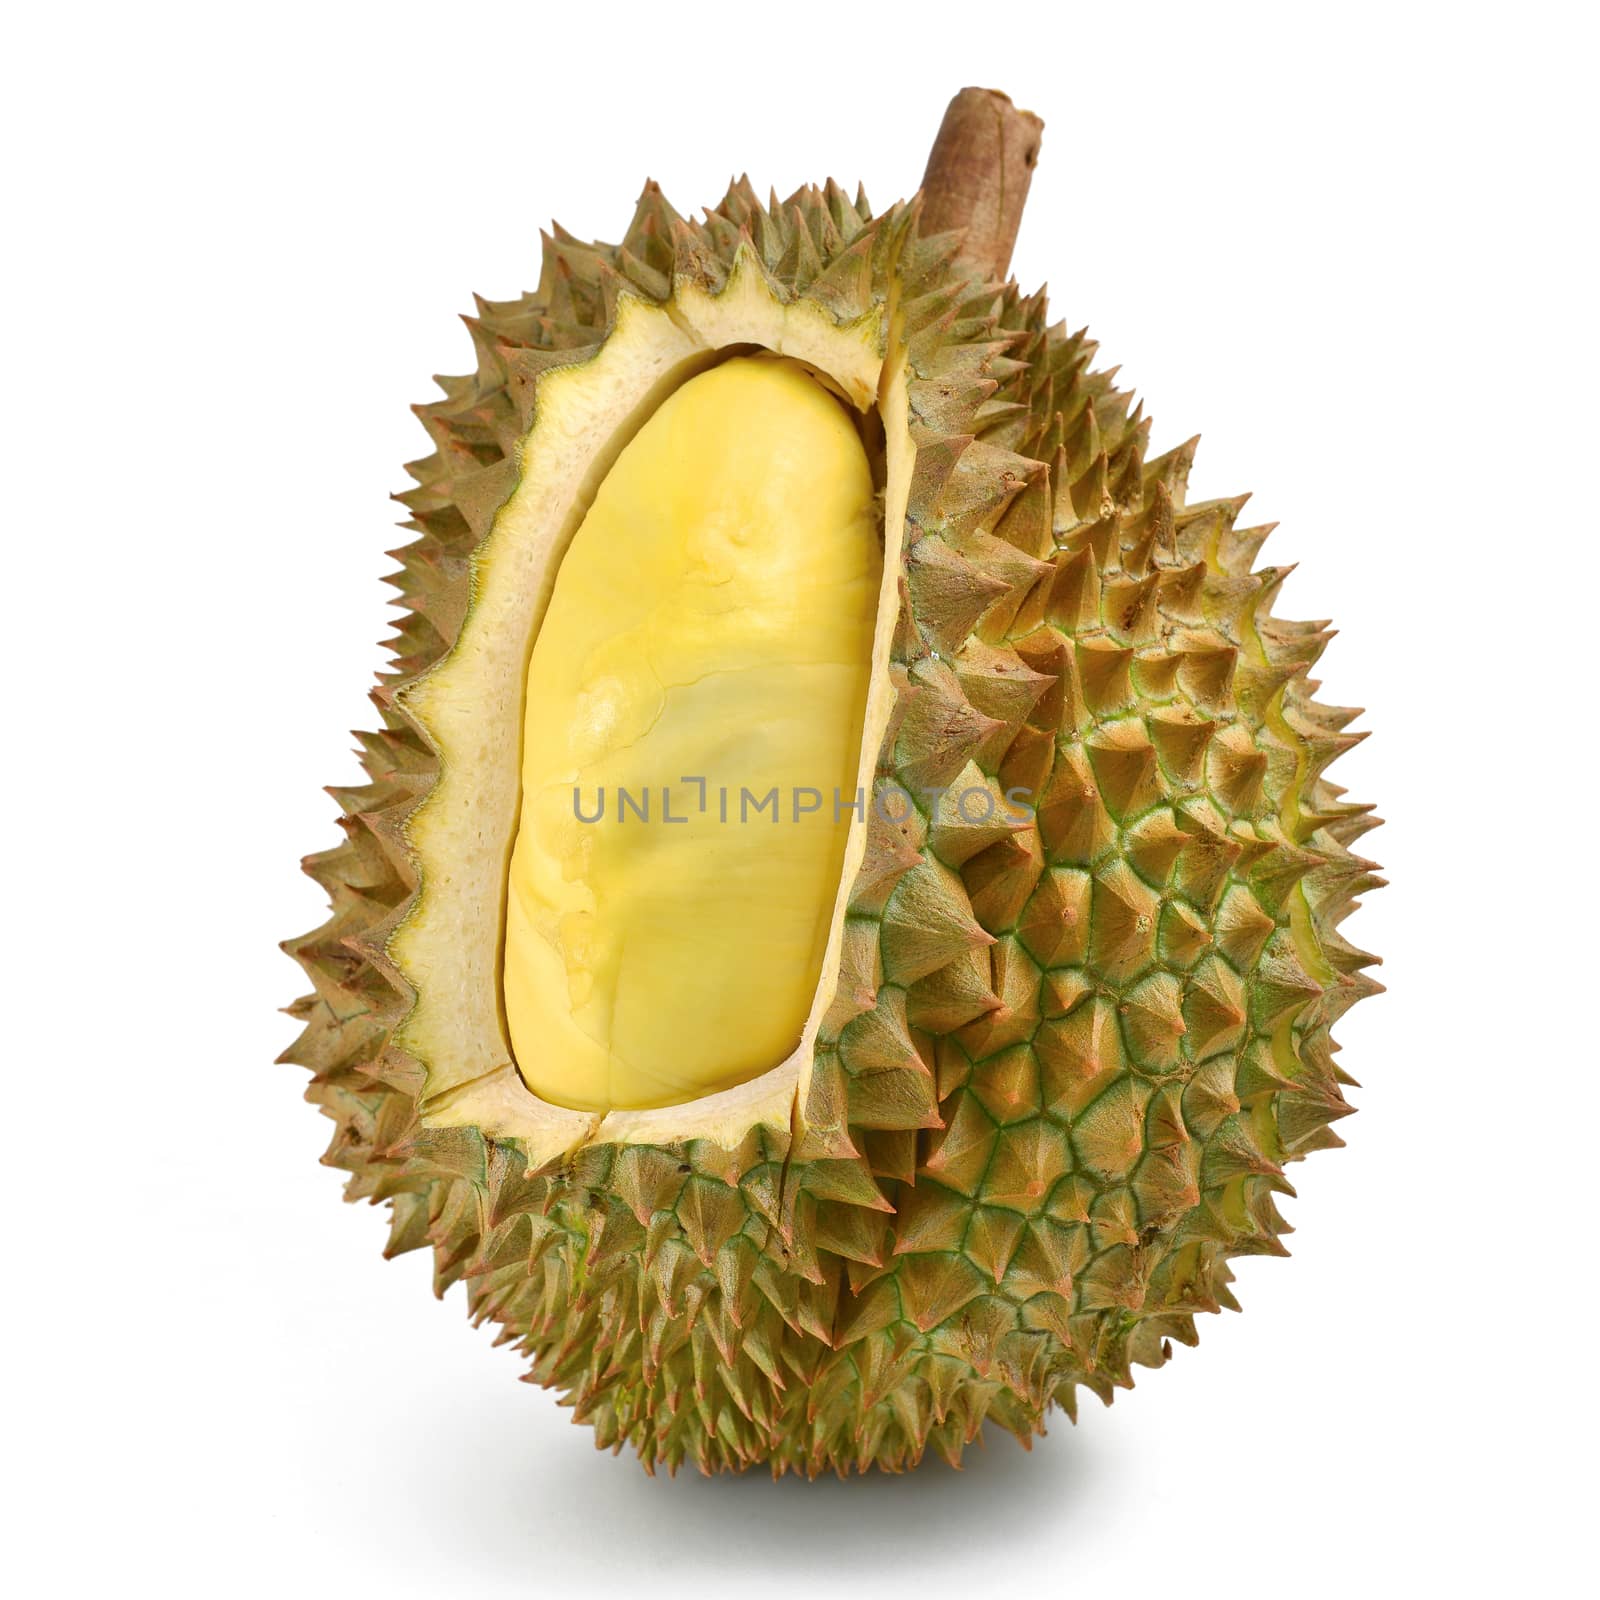 Durian by antpkr